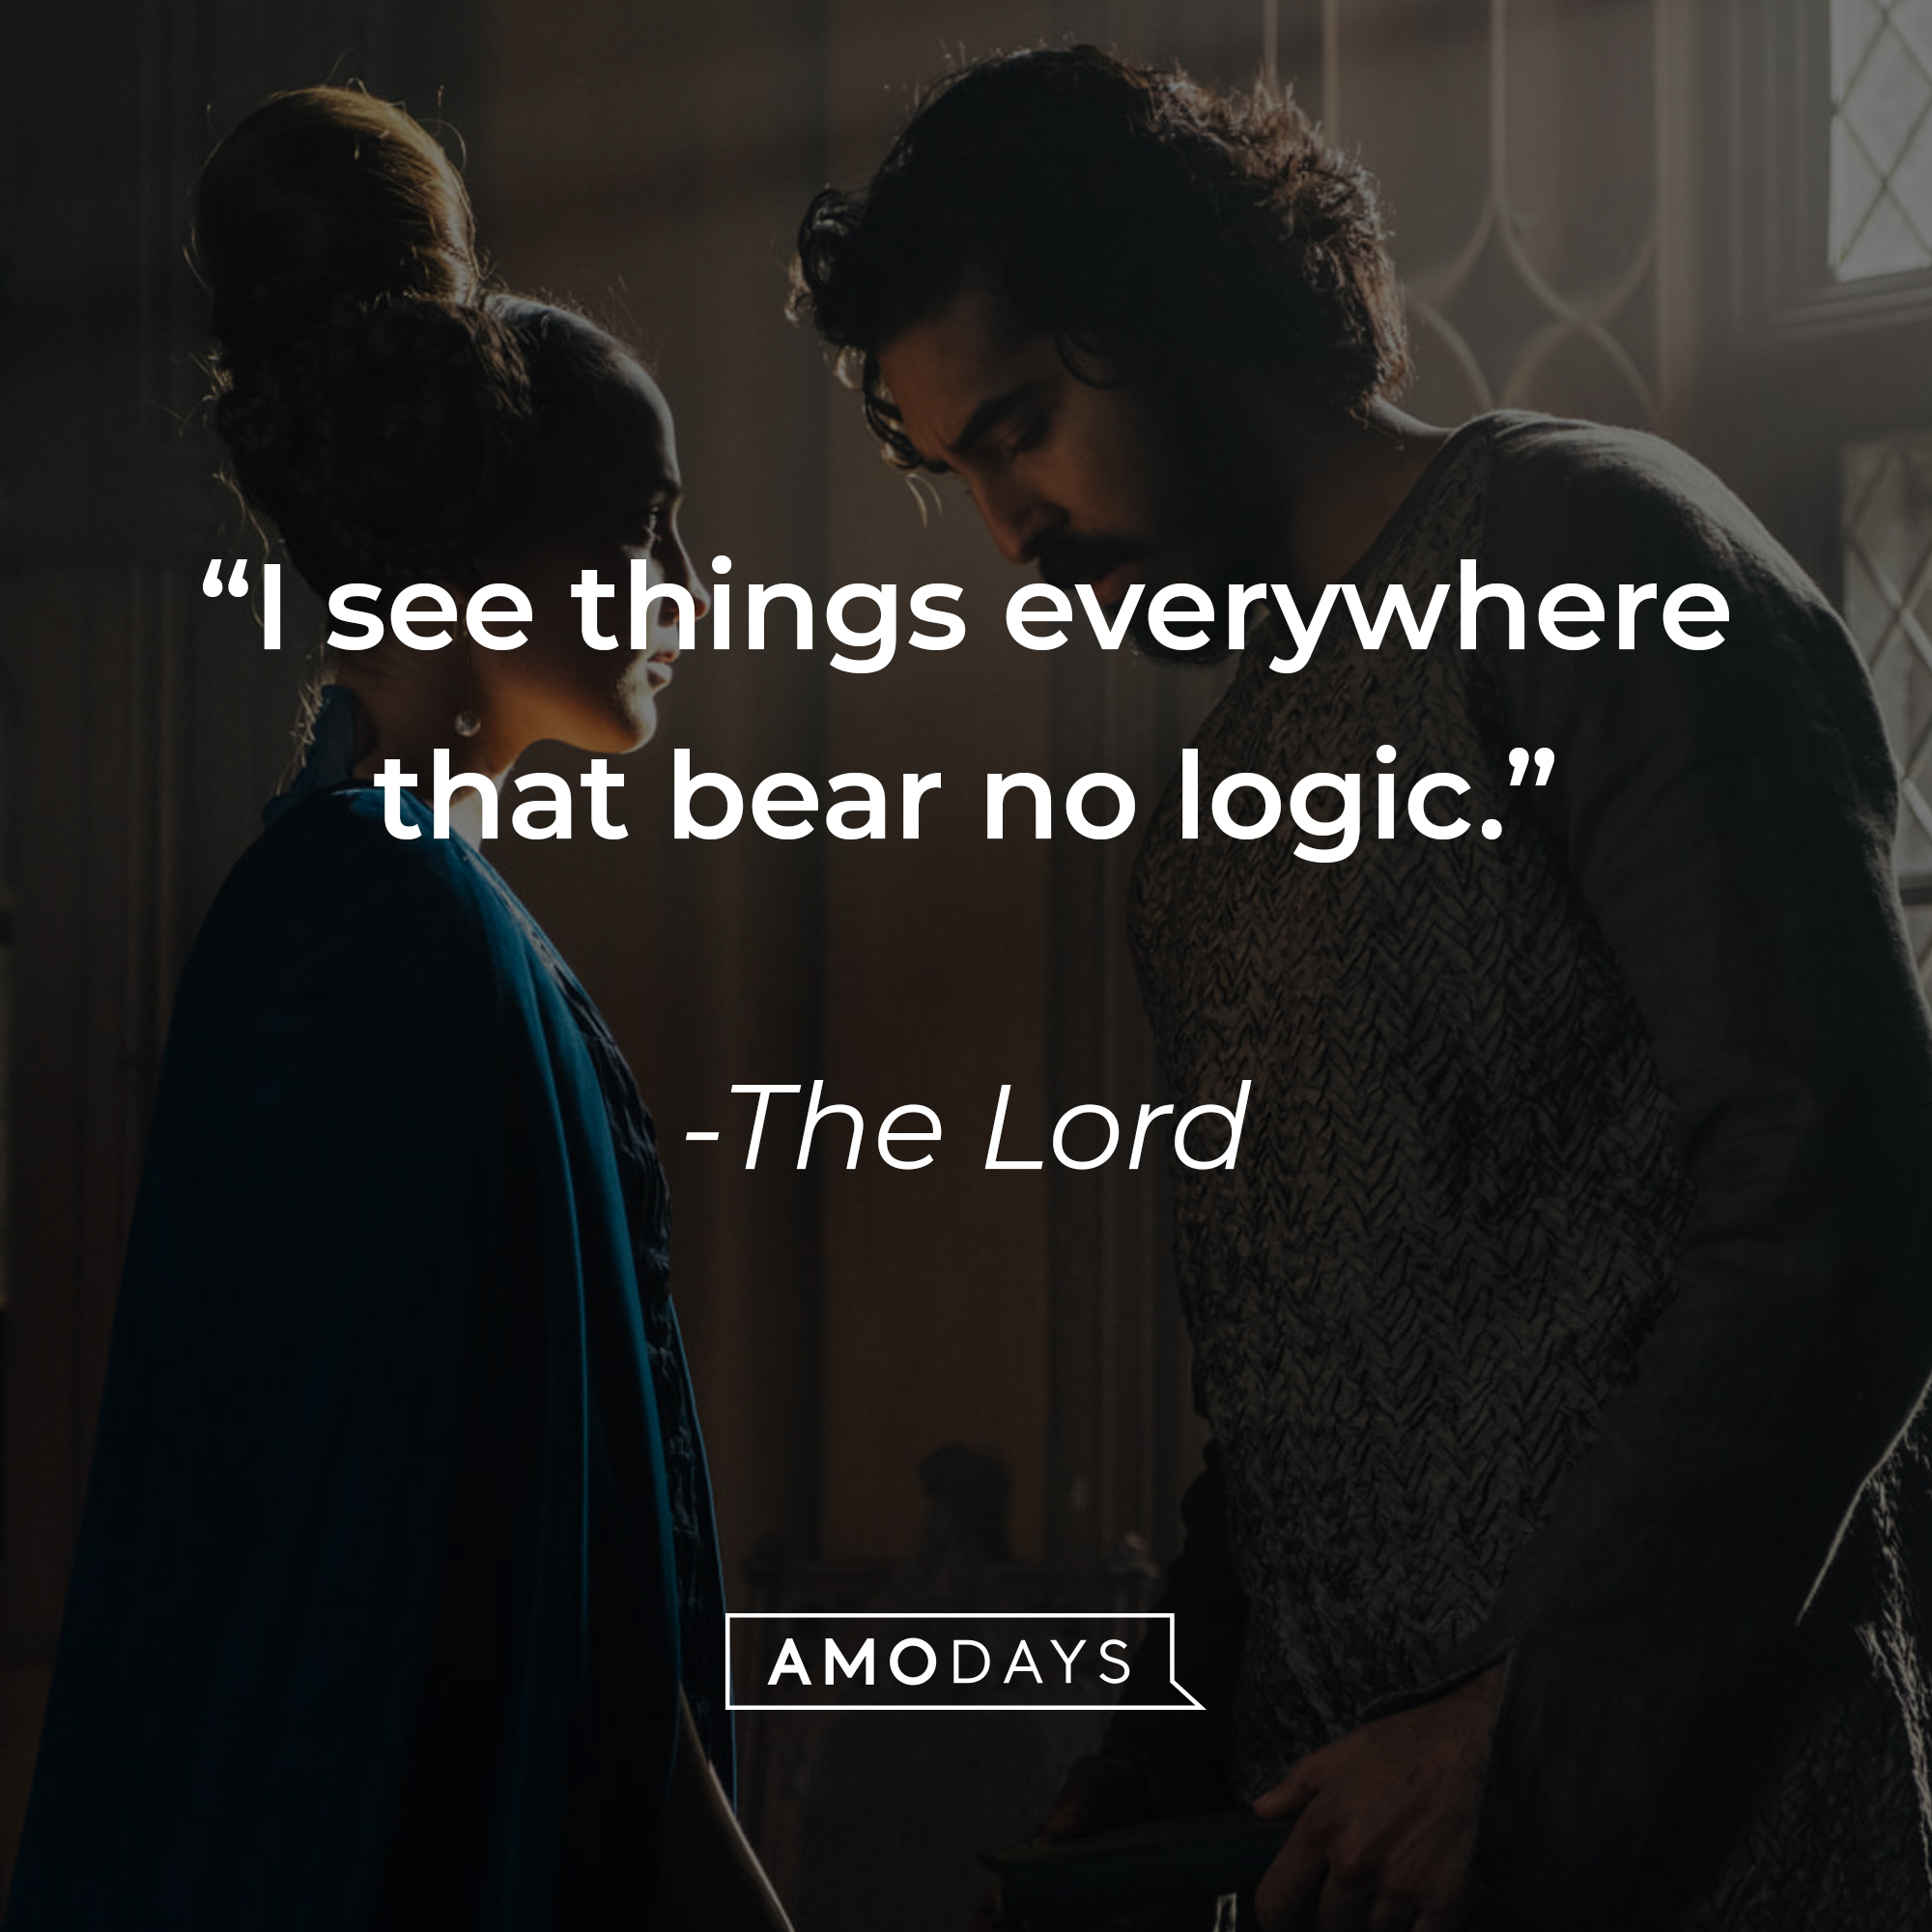 The Lord's quote: "I see things everywhere that bear no logic." | Source: facebook.com/TheGreenKnight